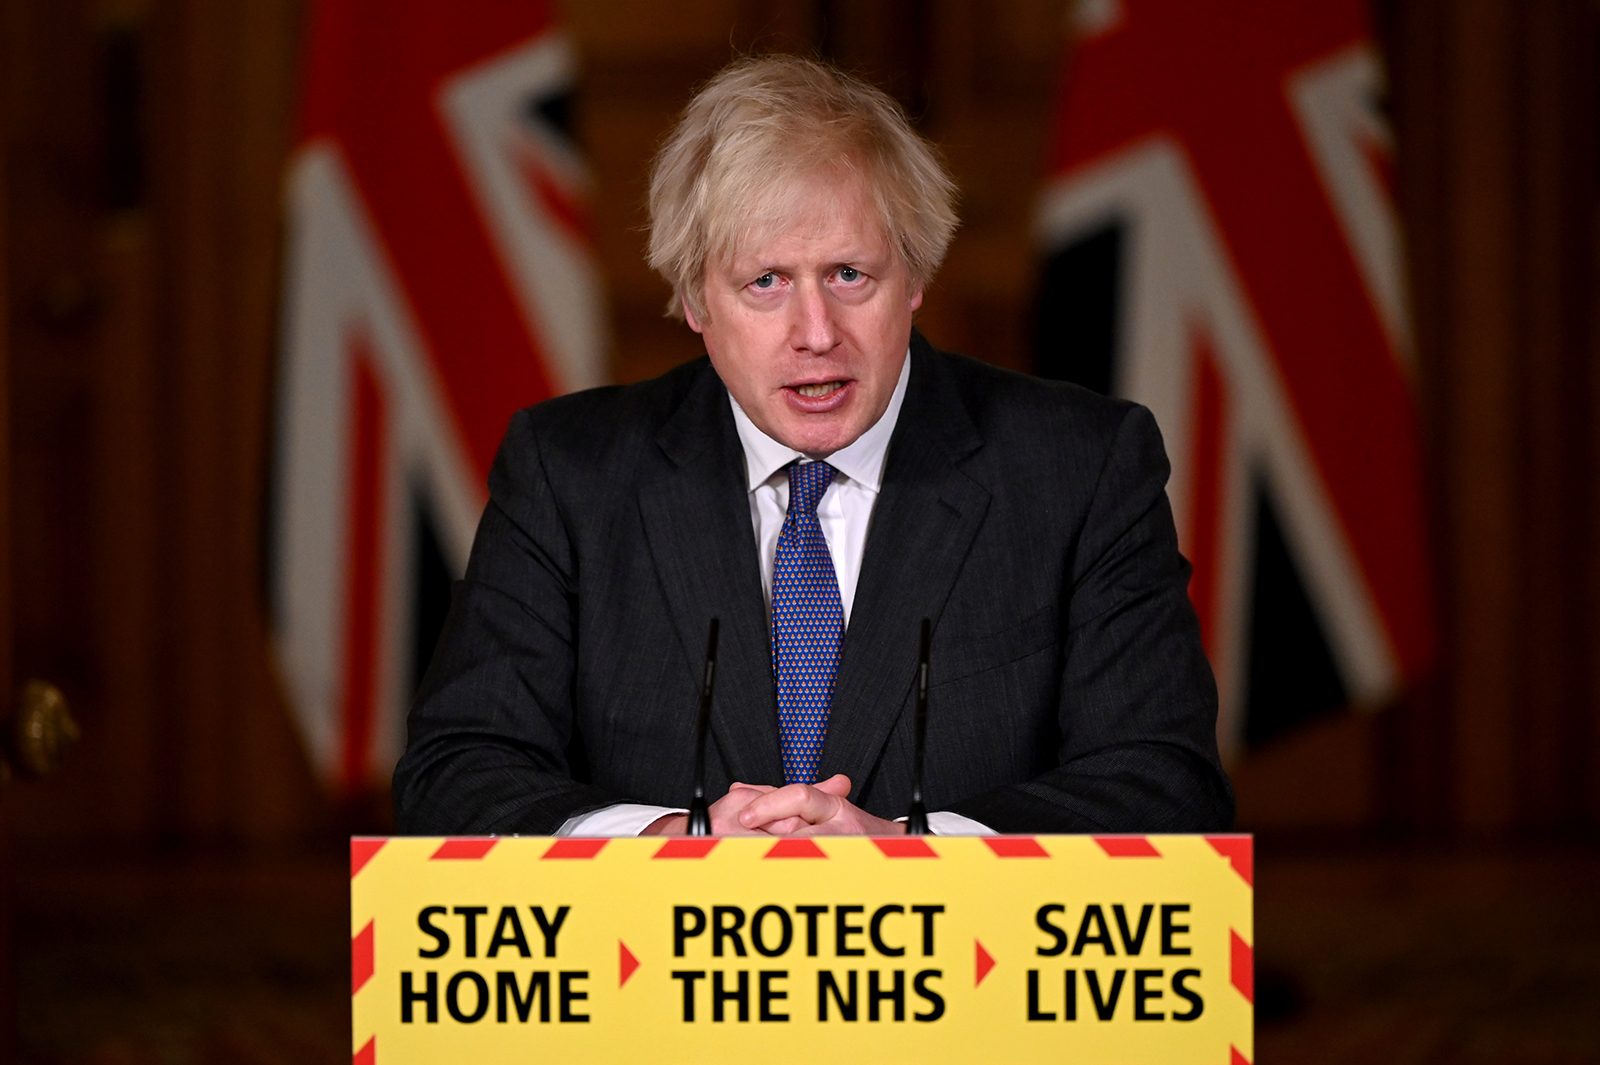 Britain's Prime Minister Boris Johnson attends a virtual press conference on Covid-19 at 10 Downing Street in London, on January 22.